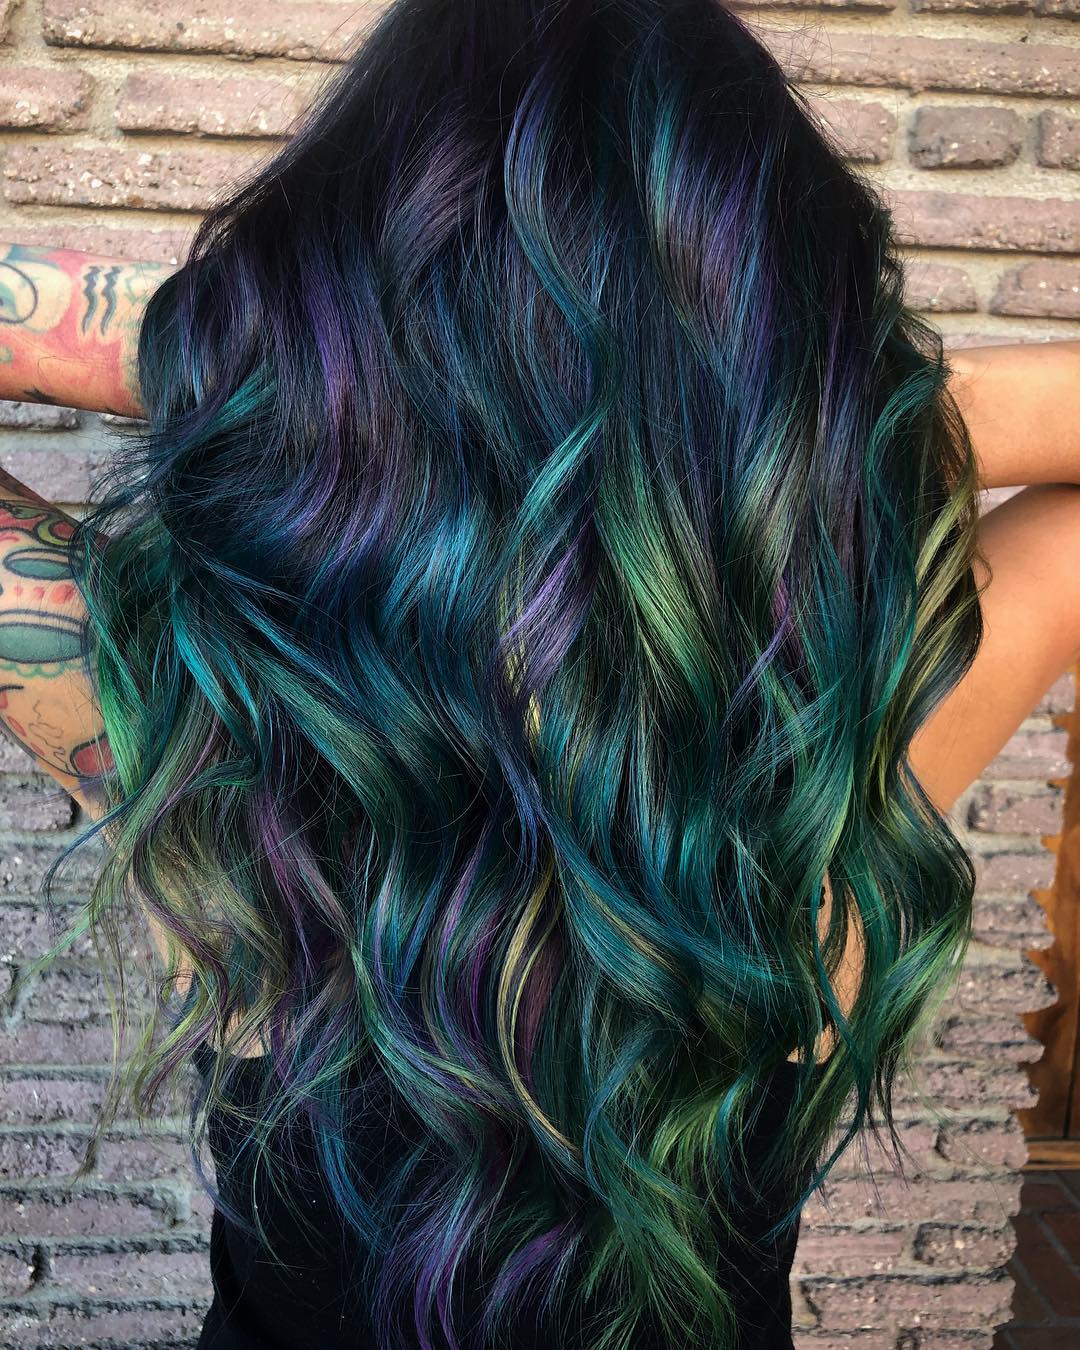 A balayage hair color blending shades of purple and green